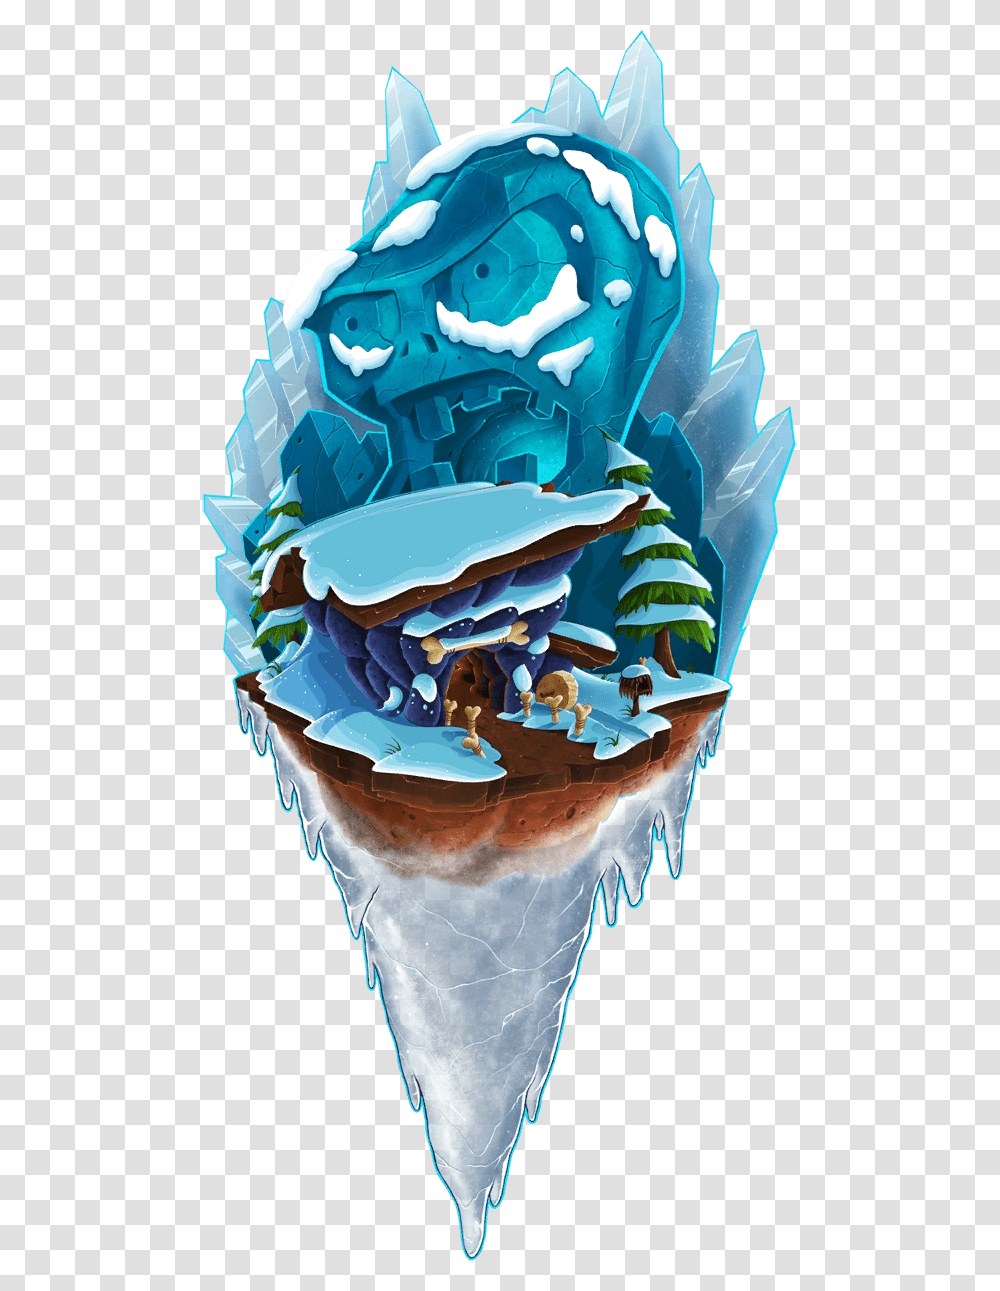 Frostbite Caves World Map Icon Plants Vs Zombies 2 Frostbite Caves World, Birthday Cake, Food, Outer Space, Astronomy Transparent Png